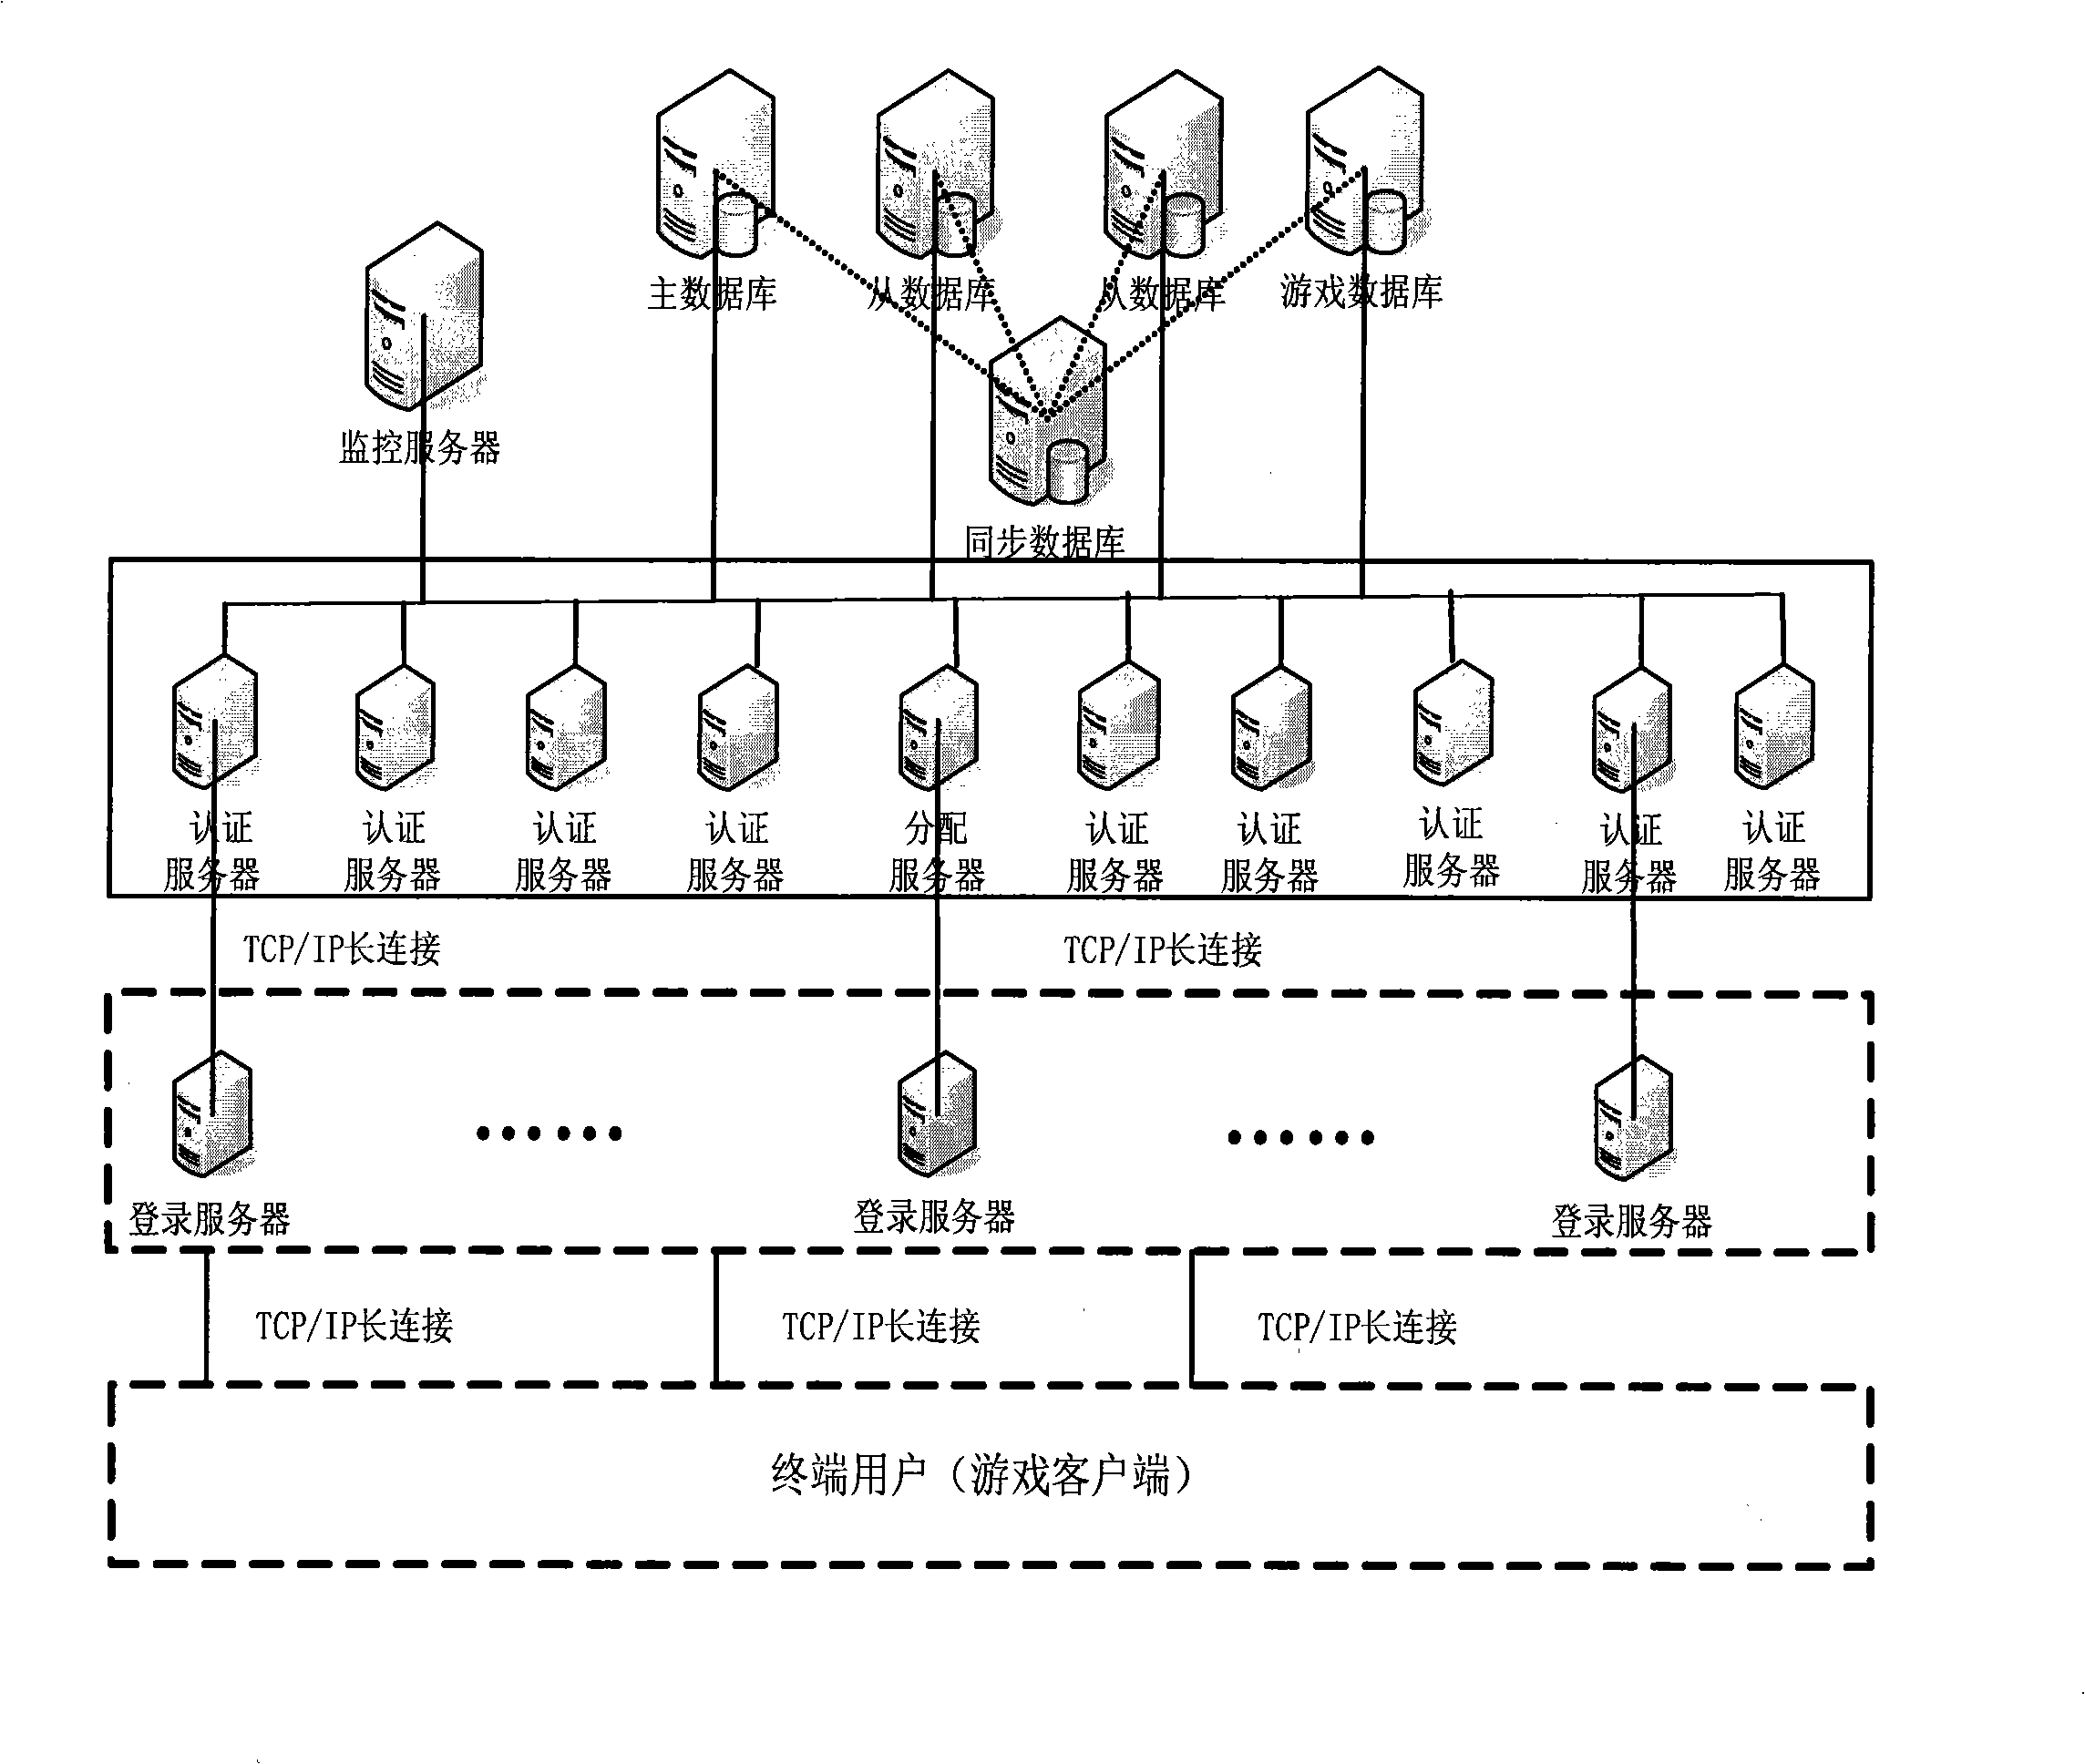 License authentication system